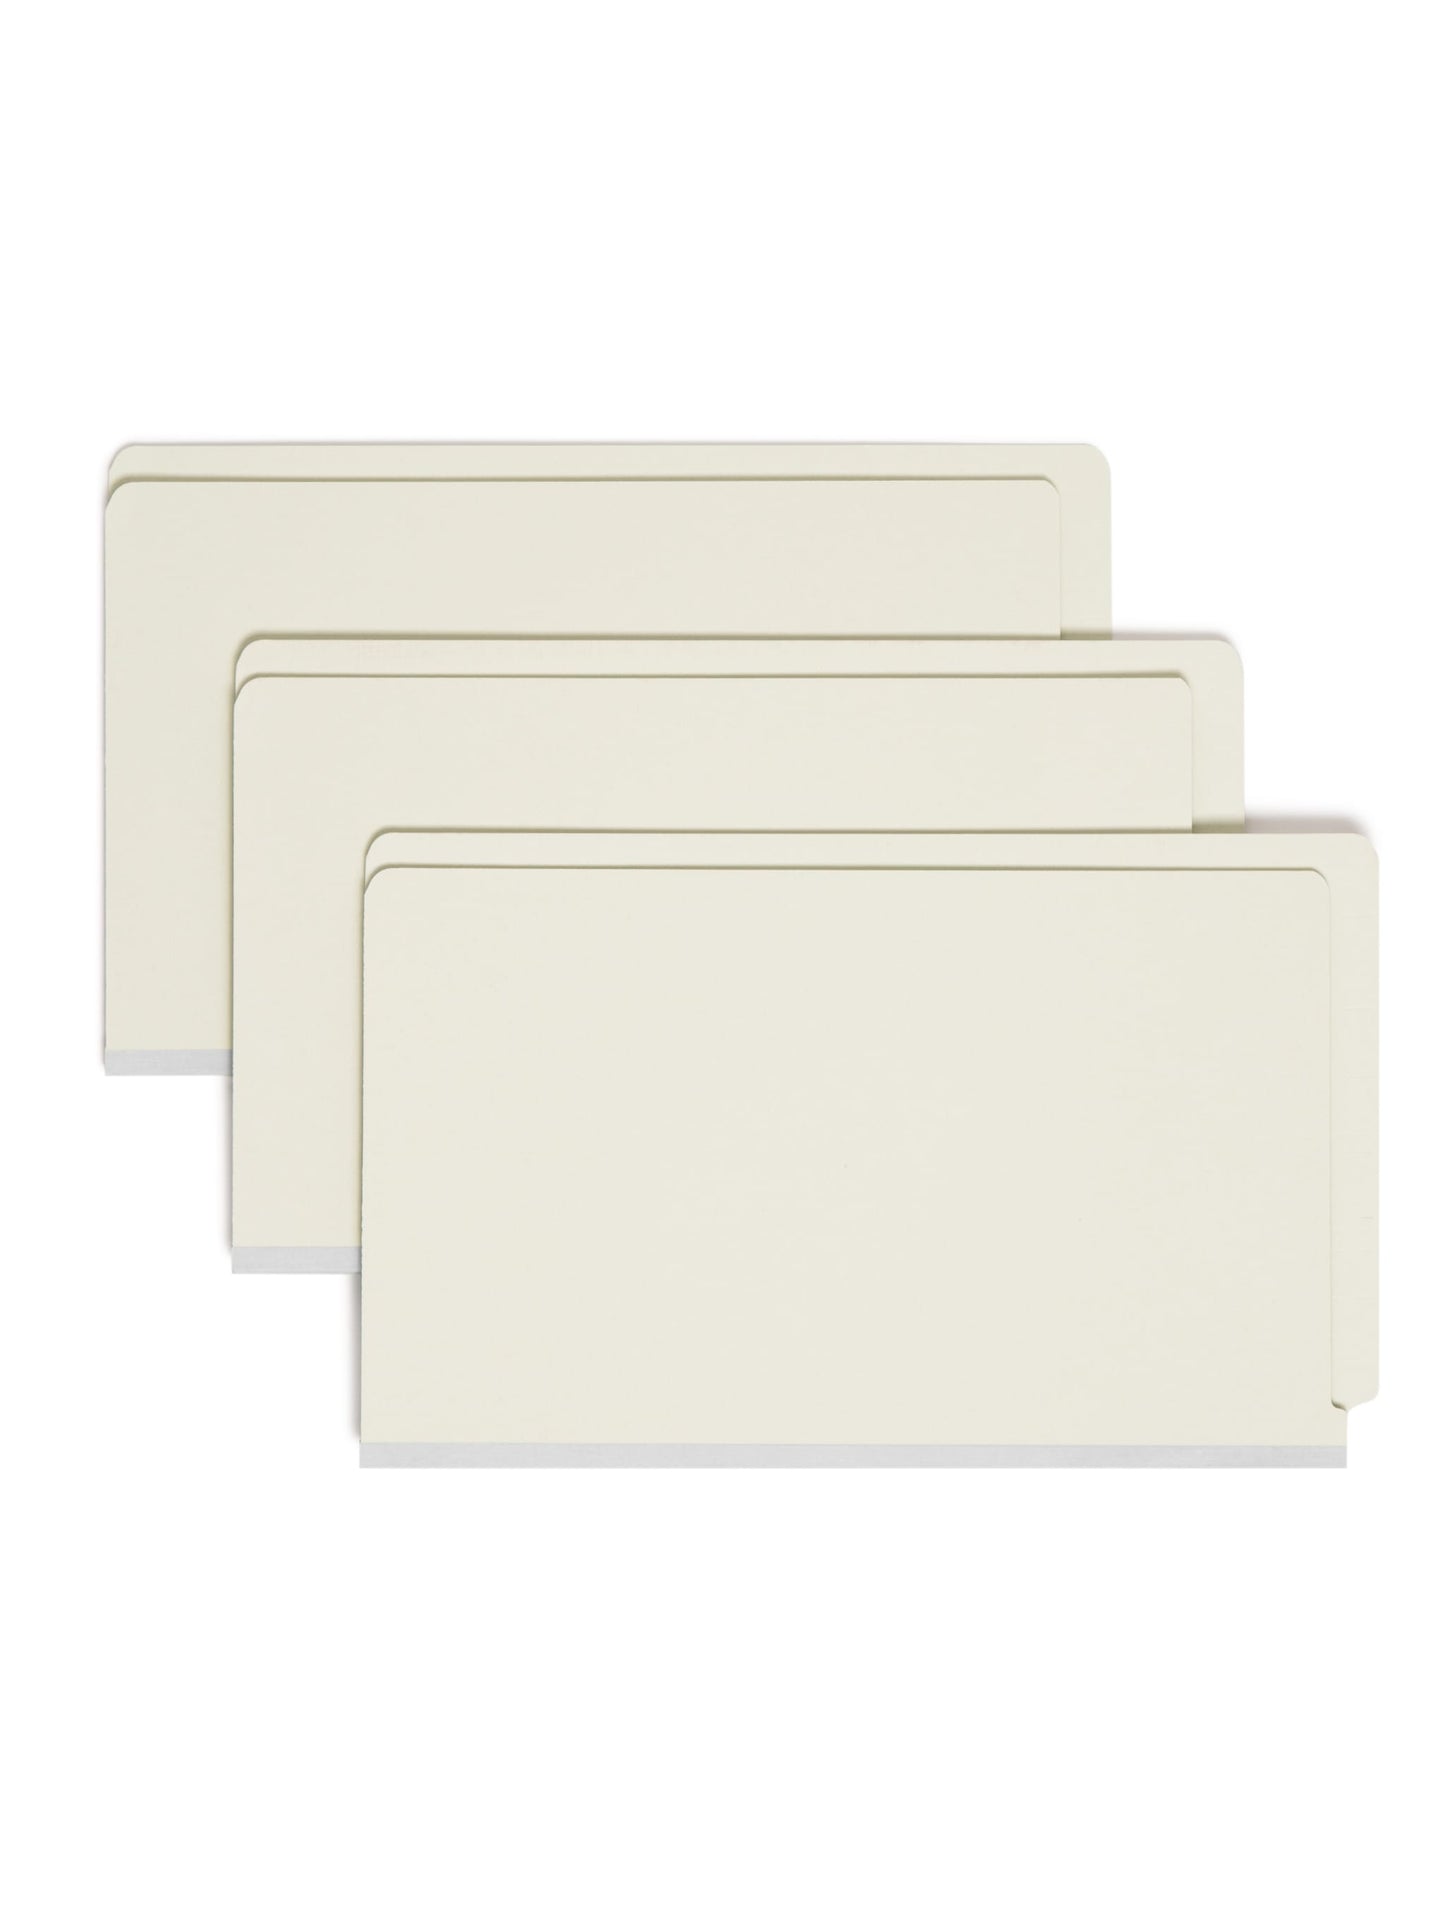 Pressboard End Tab File Folders, Straight-Cut Tab, 2 inch Expansion, Gray/Green Color, Legal Size, Set of 25, 086486292108